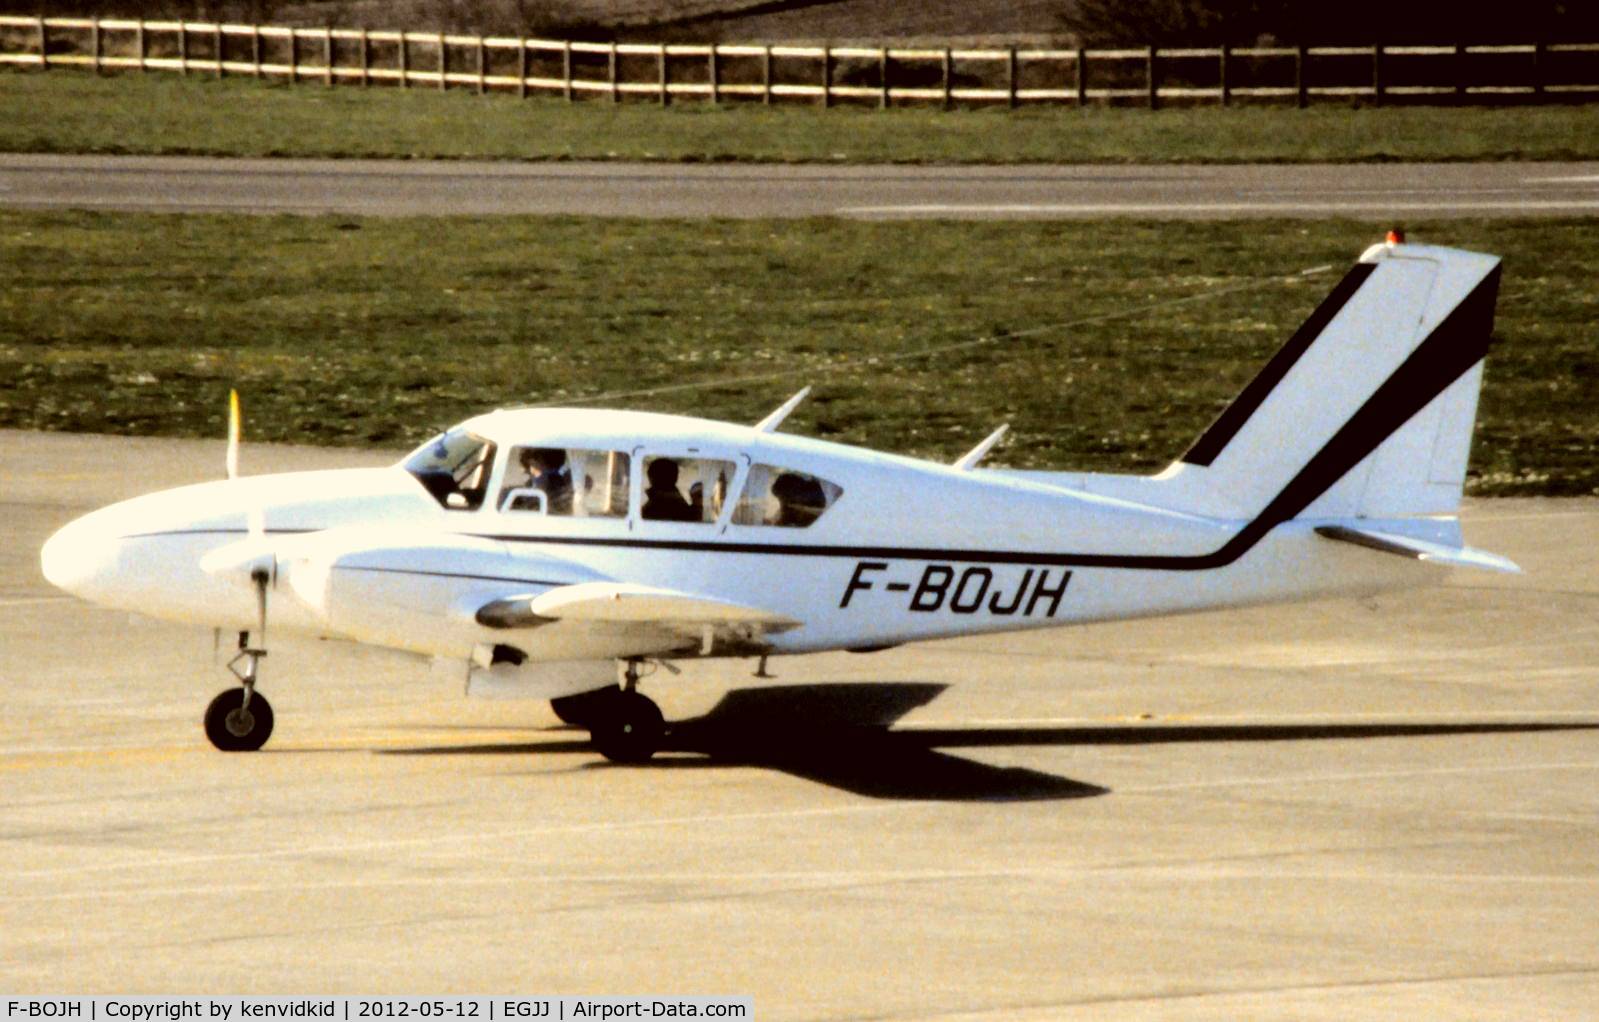 F-BOJH, Piper PA-23-250C Aztec C/N 27-3379, At Jersey airport early 1970's.
Scanned from slide.